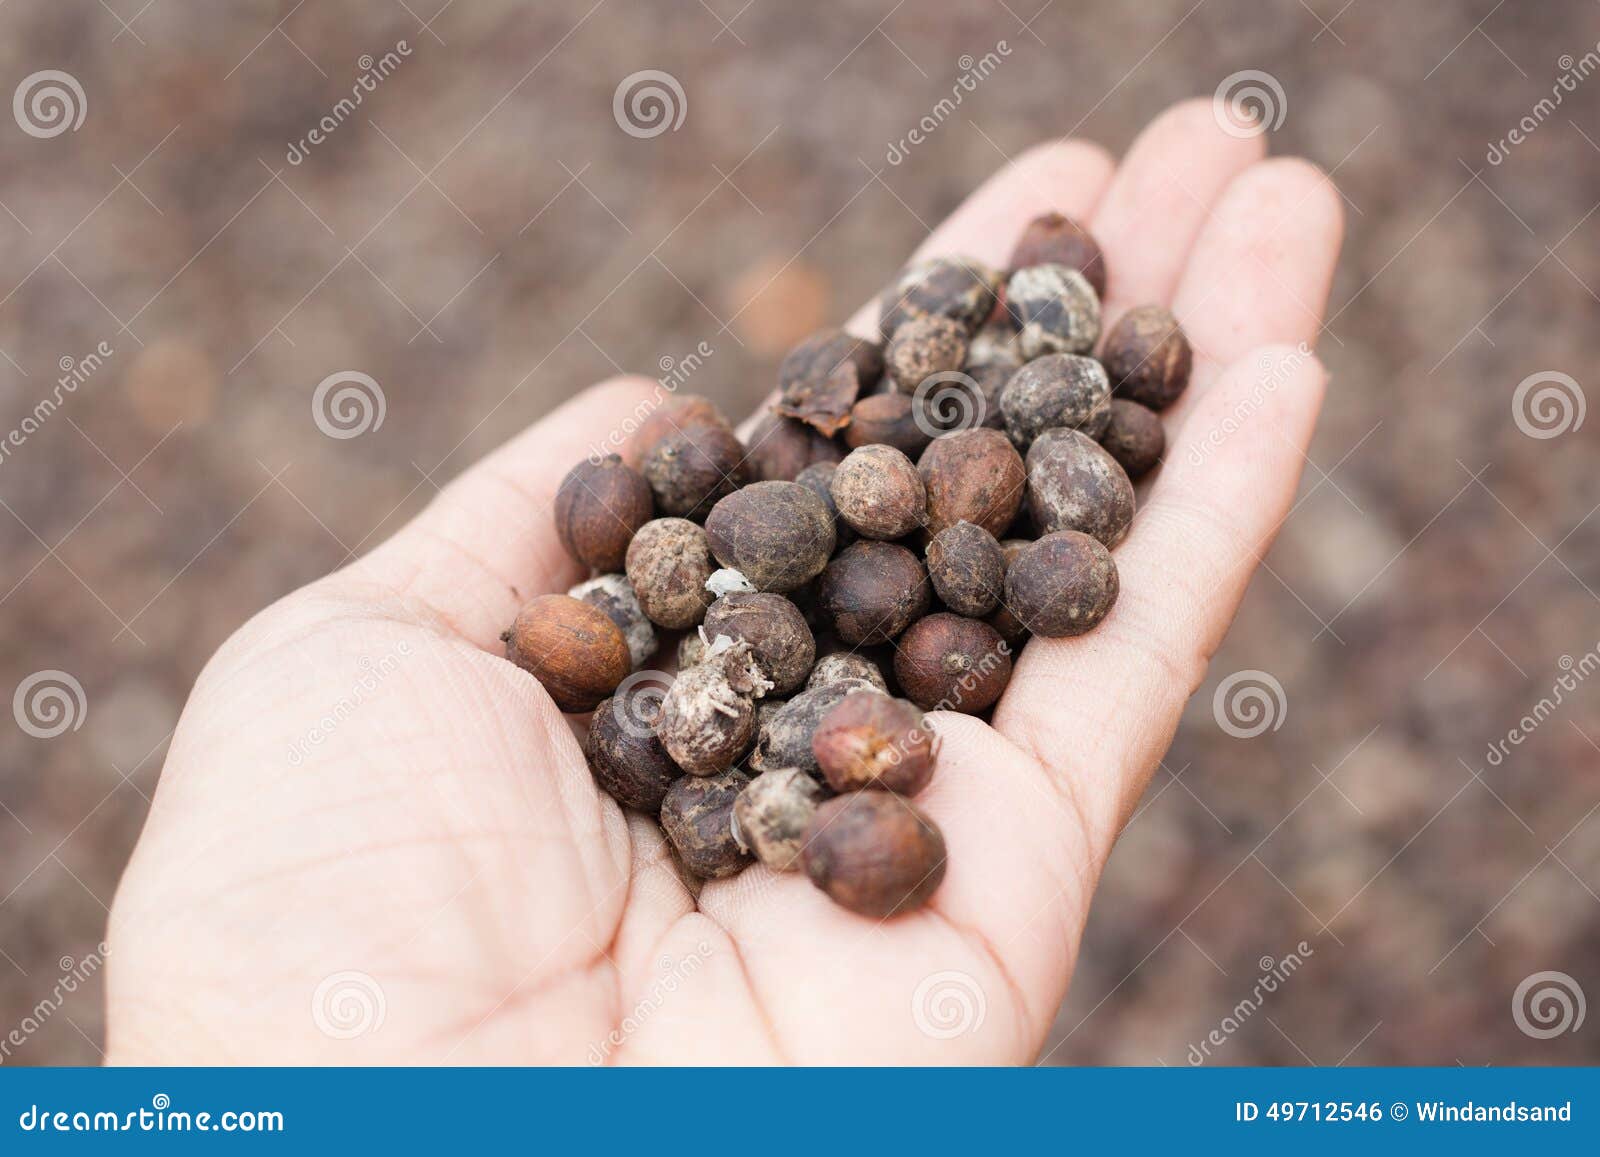 dried berries coffee beans on hands